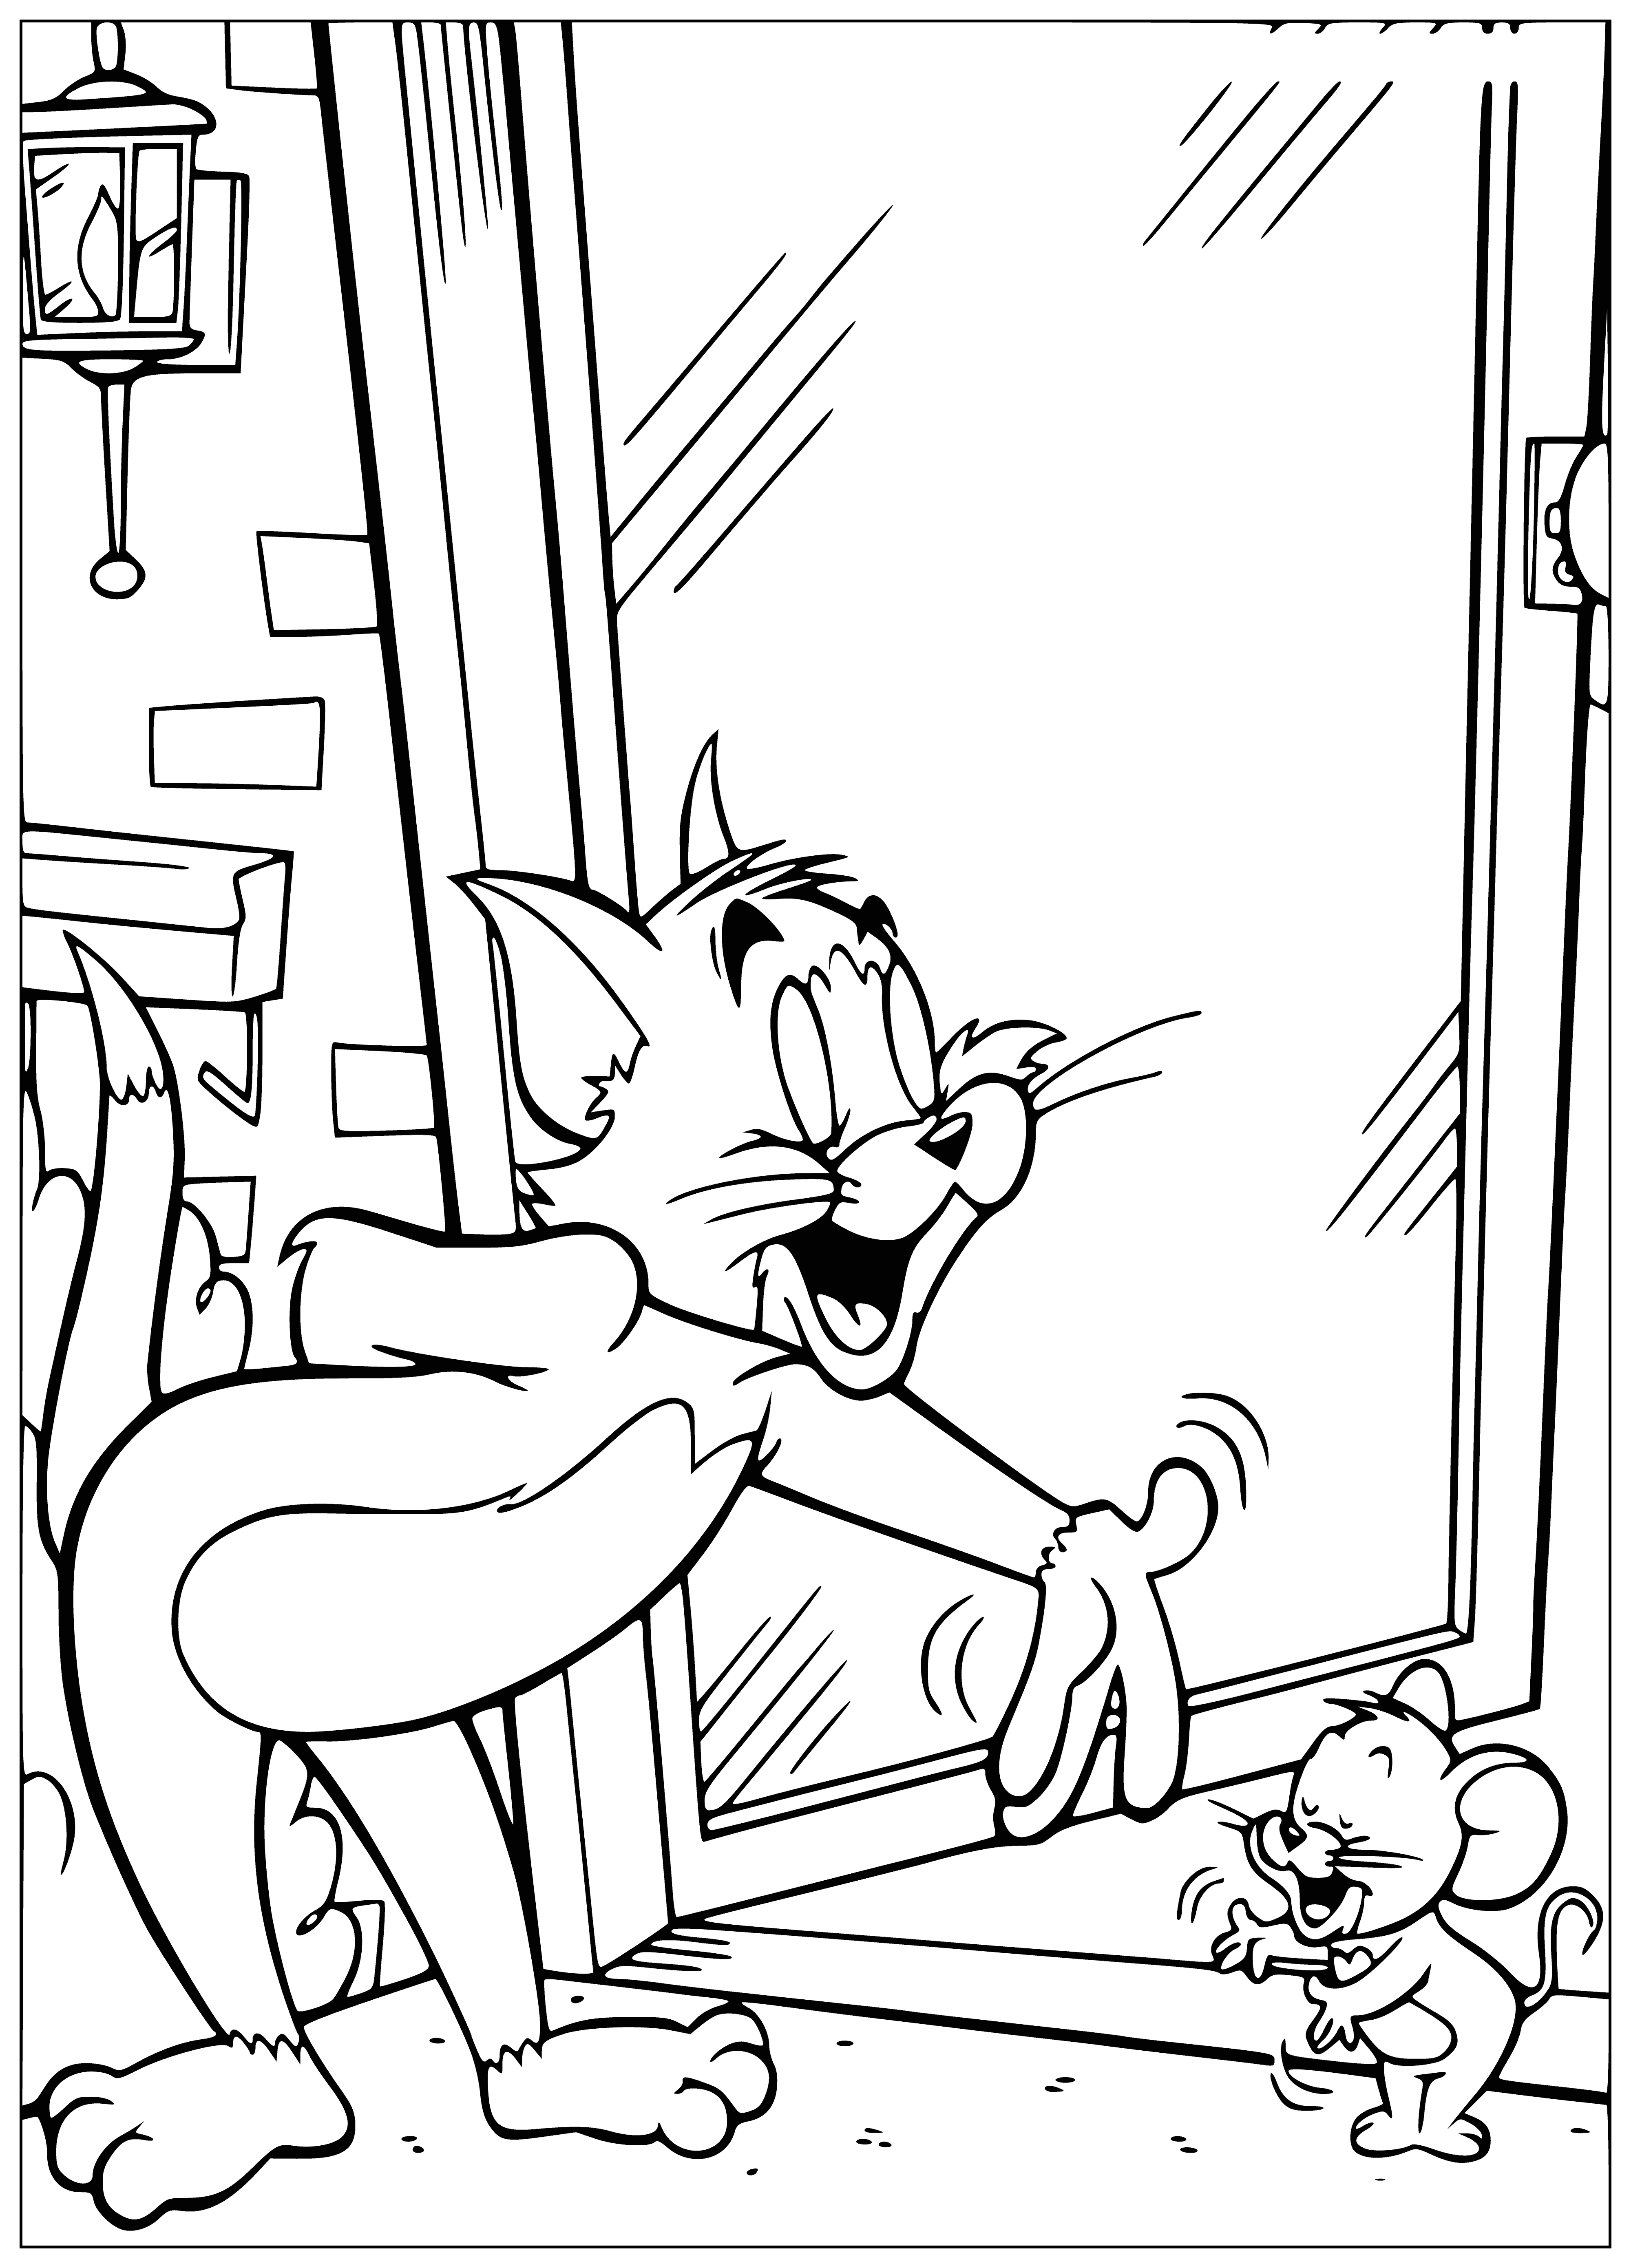 coloring page: Two mice, one black and white and one brown, are running away from a black cat who is chasing them.